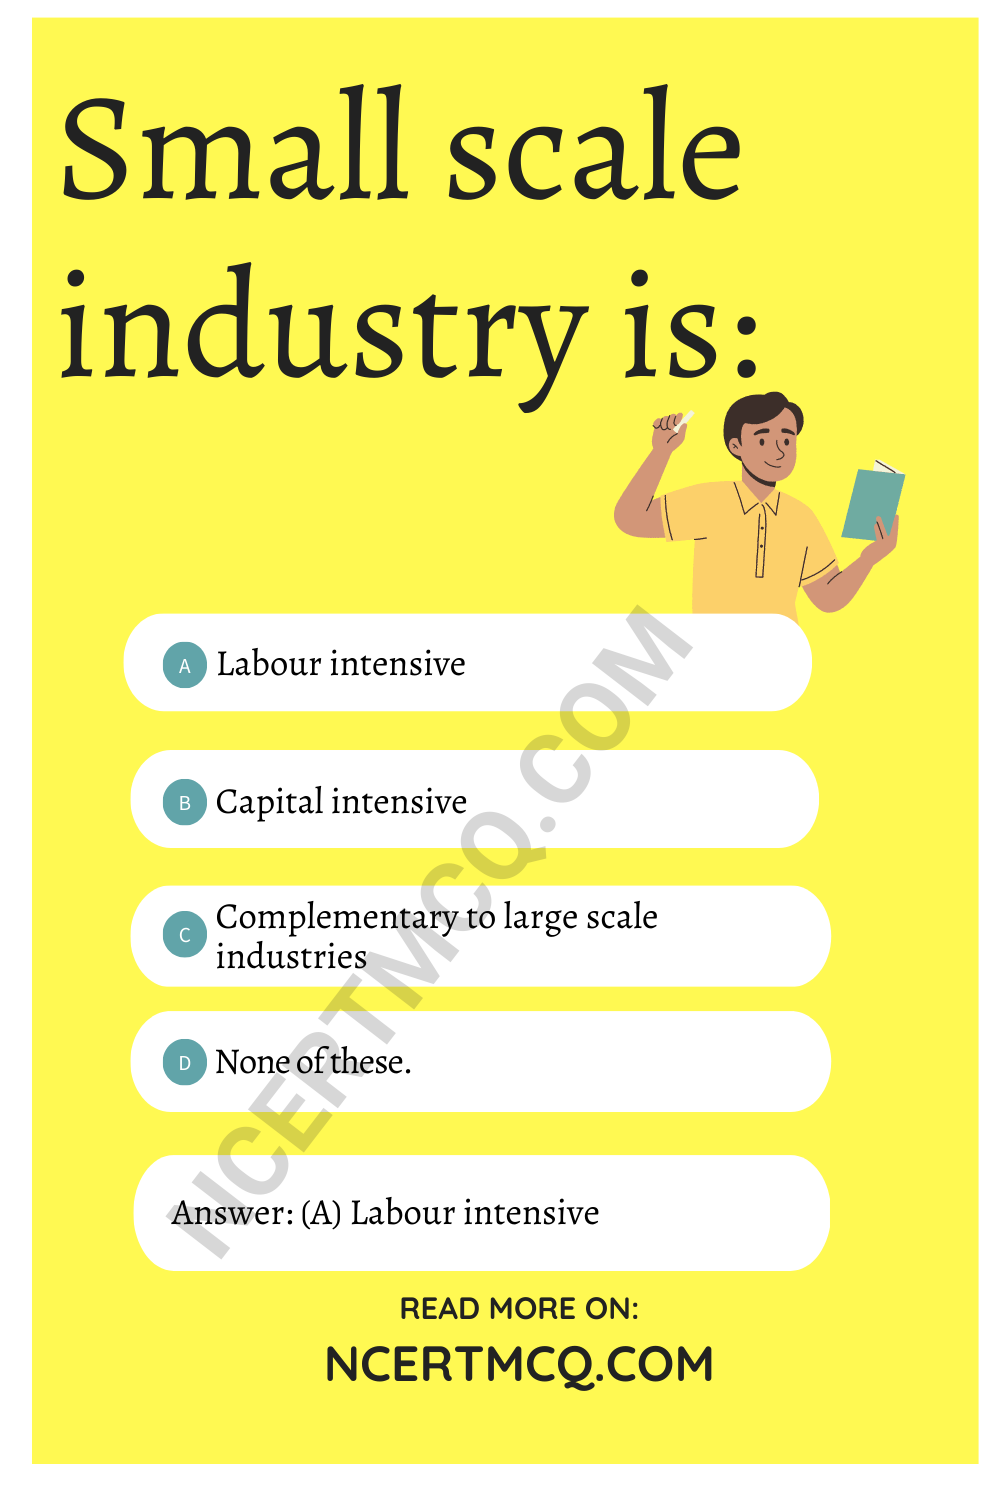 Small scale industry is: